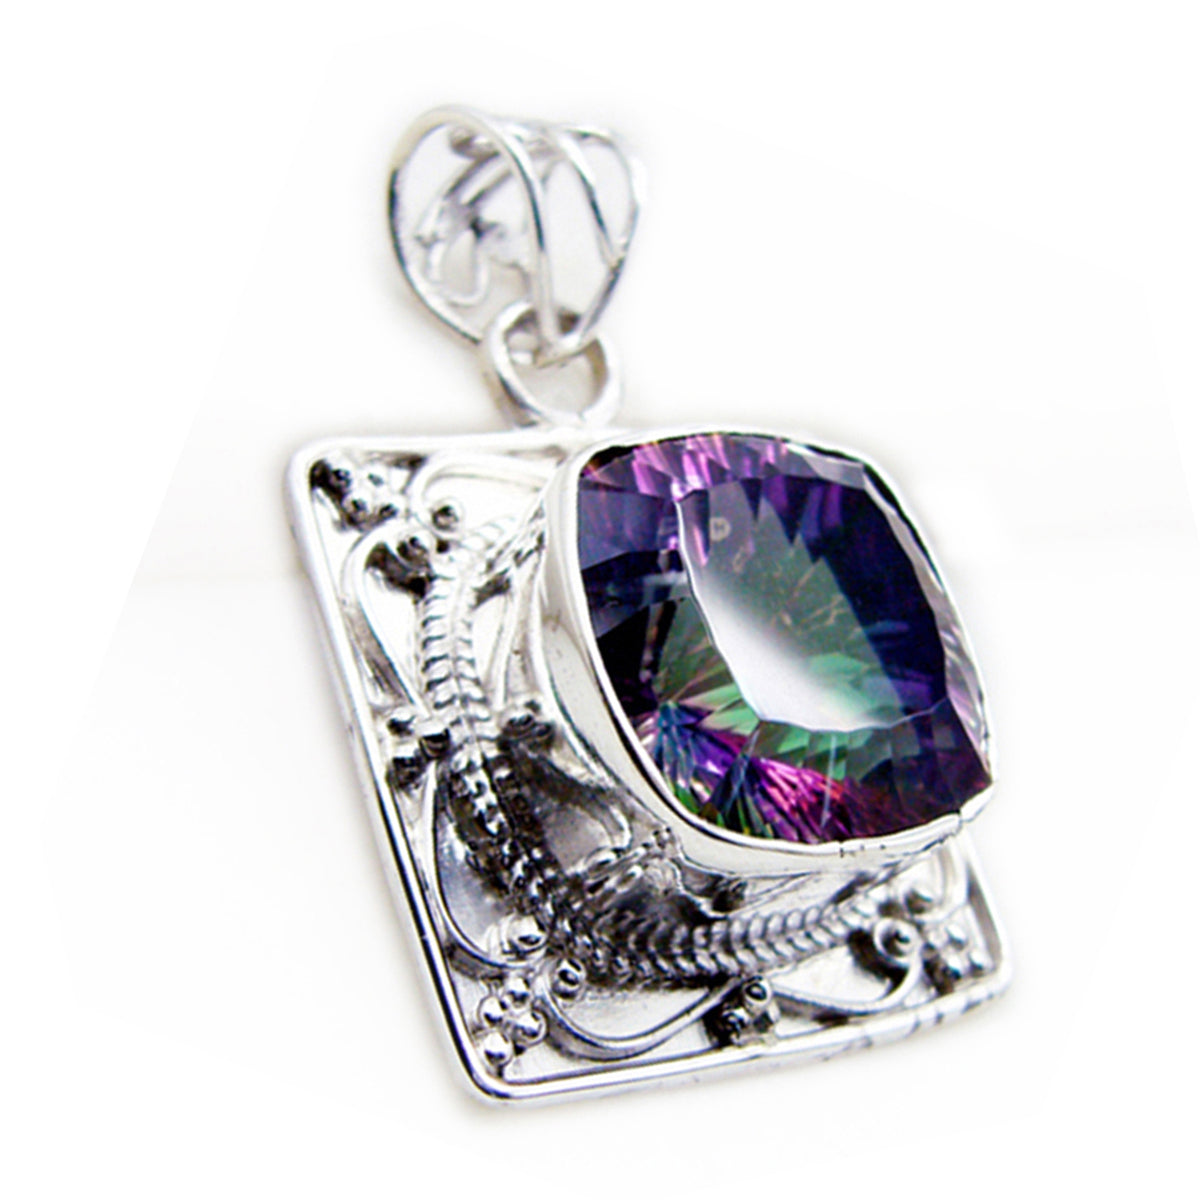 Riyo Good Gems Cushion Faceted Multi Color Mystic Quartz Silver Pendant Gift For Boxing Day